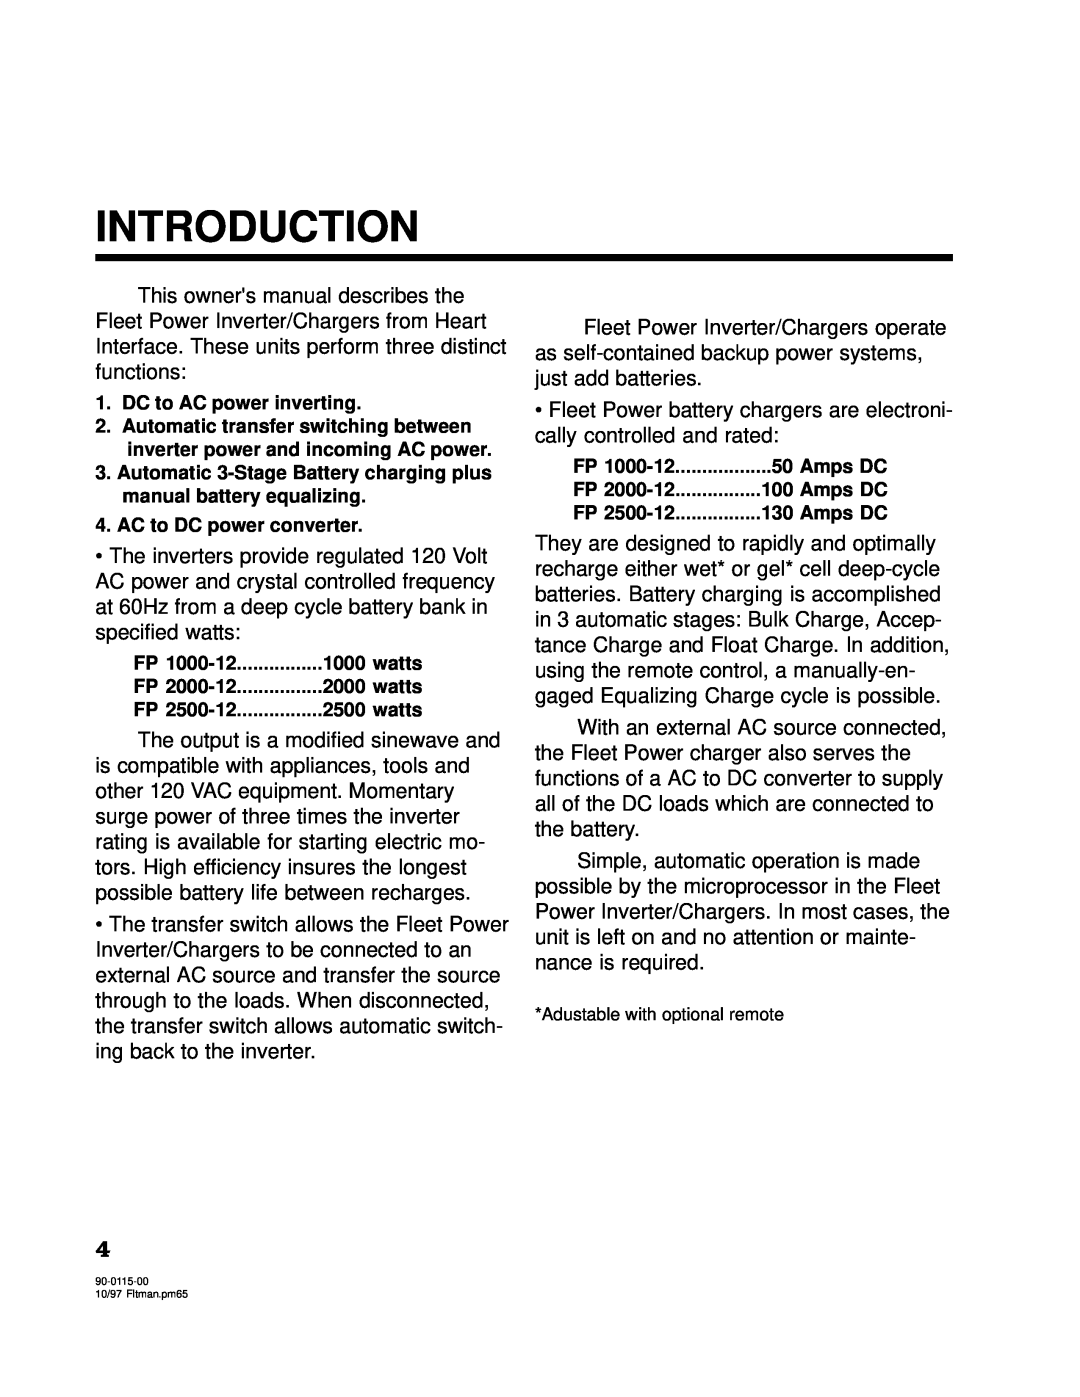 Xantrex Technology 2500, 2000 owner manual Introduction, DC to AC power inverting 